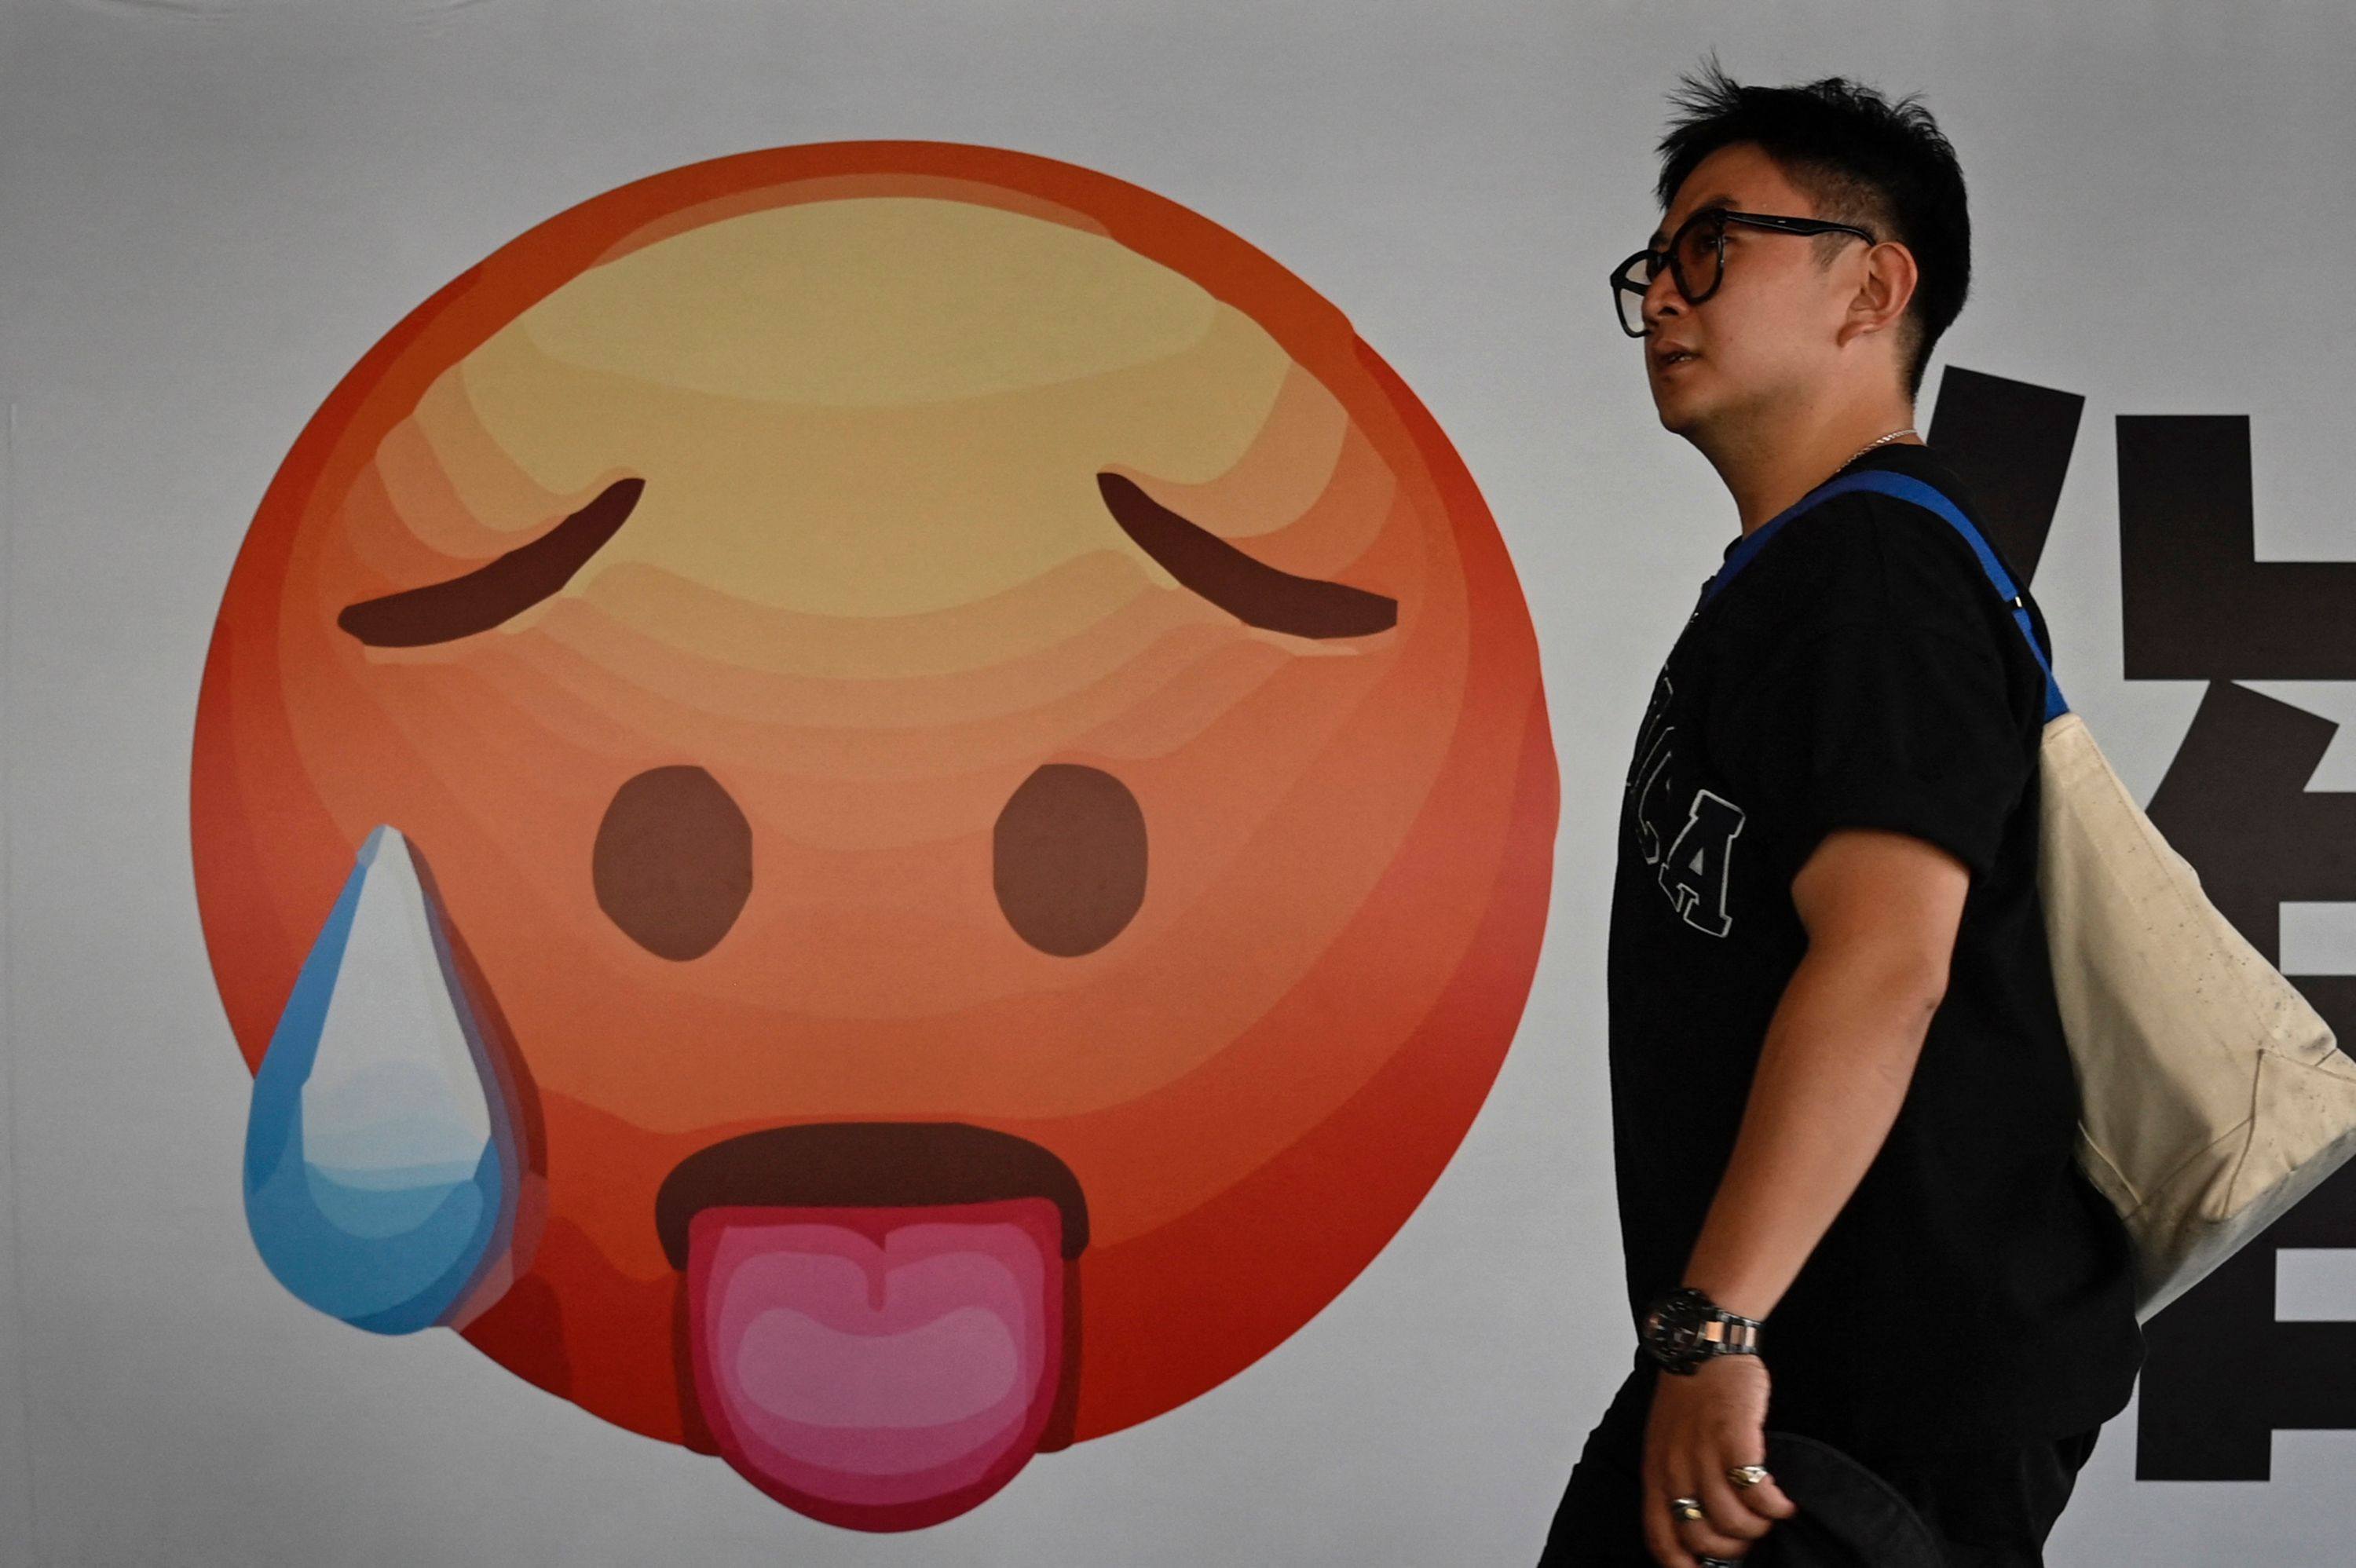 A man walks past an emoji at a shopping mall in Beijing on July 20. While the chances are good that the Chinese economy can hit the expected 5 per cent annual growth target, the government may have to step in more forcefully to nudge growth back on track. Photo: AFP